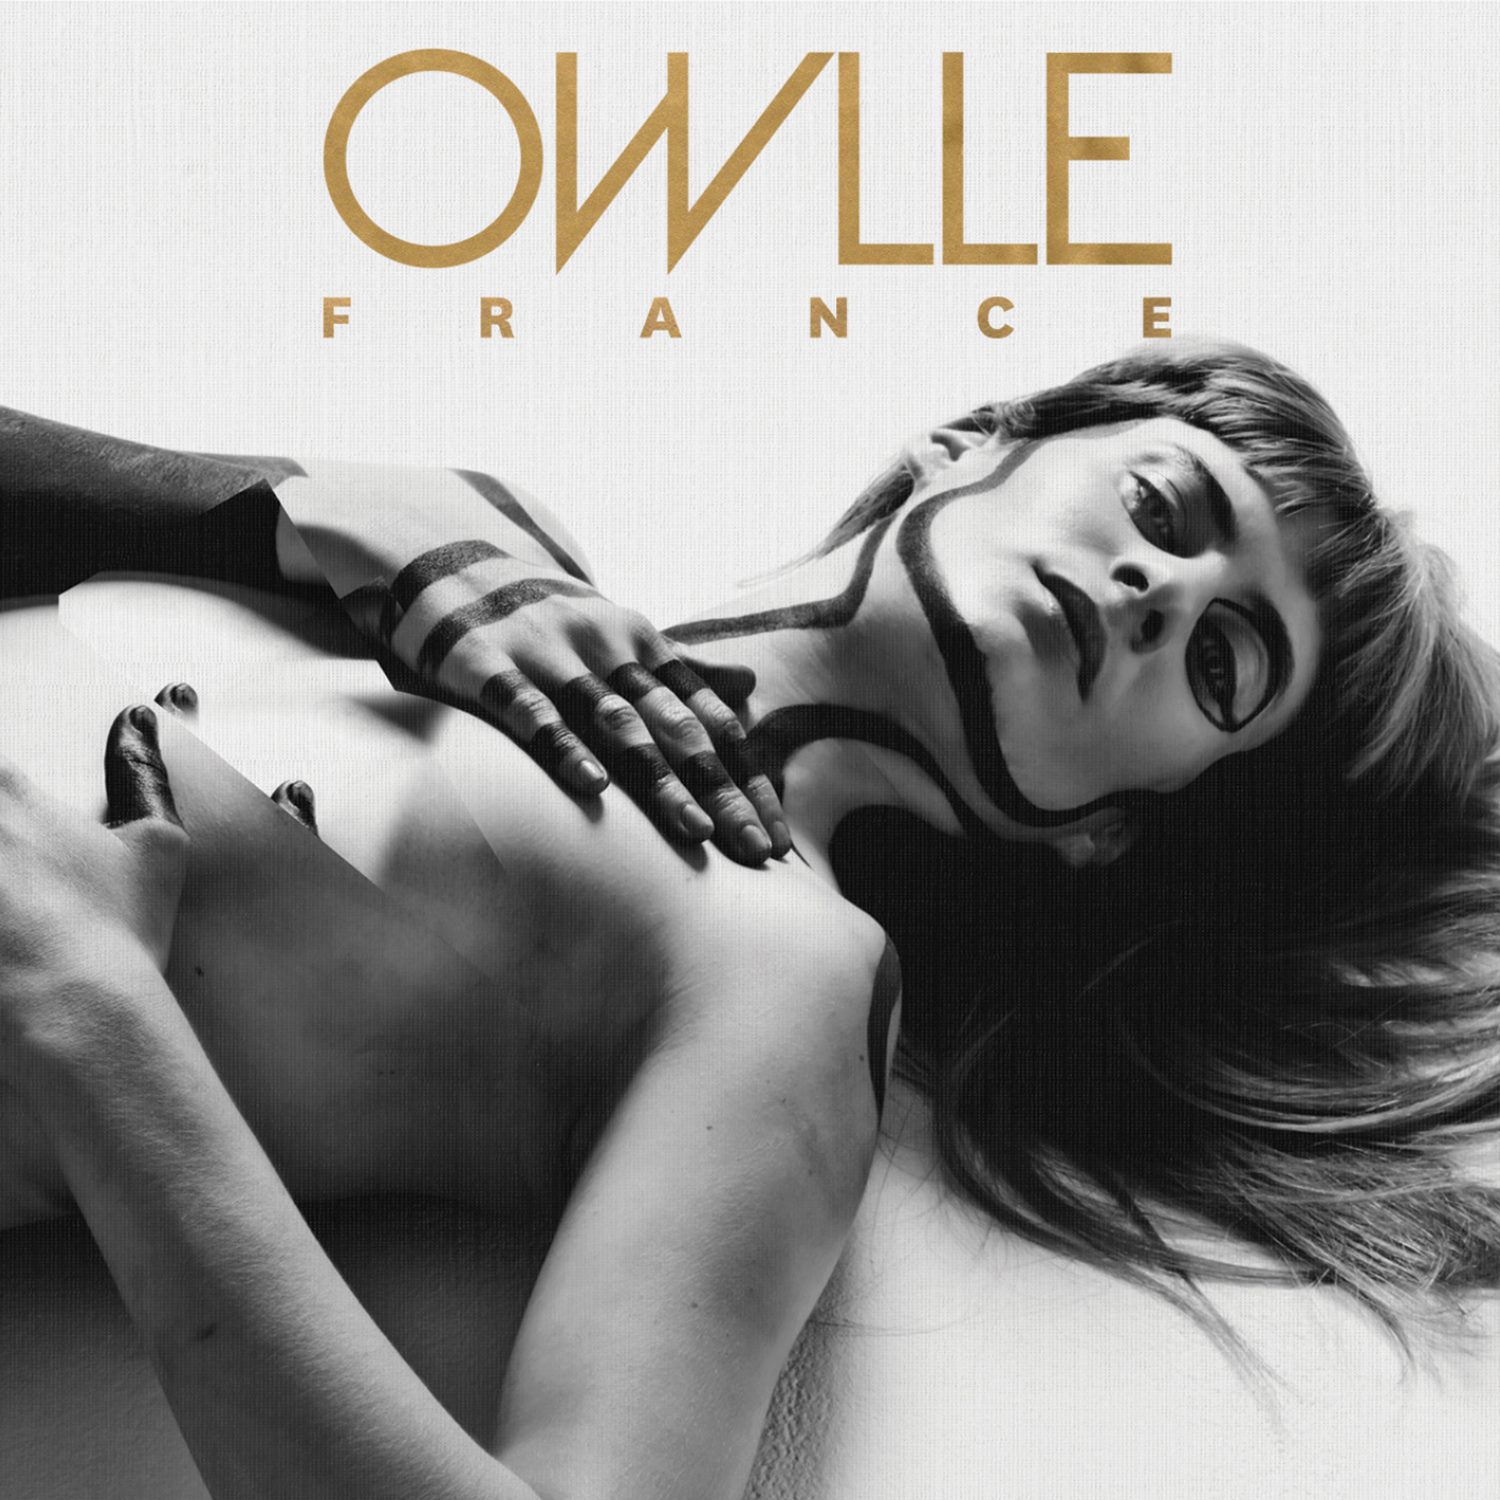 News Added Dec 30, 2013 Owlle, with her flaming red hair atop turquoise eyes, enchants the eyes and ears of those who stumble upon the young French woman, coincidentally named France. Yet it was an Englishman and a British owl that happened to profoundly move her to take to emboldening Parisian dance floors to her […]